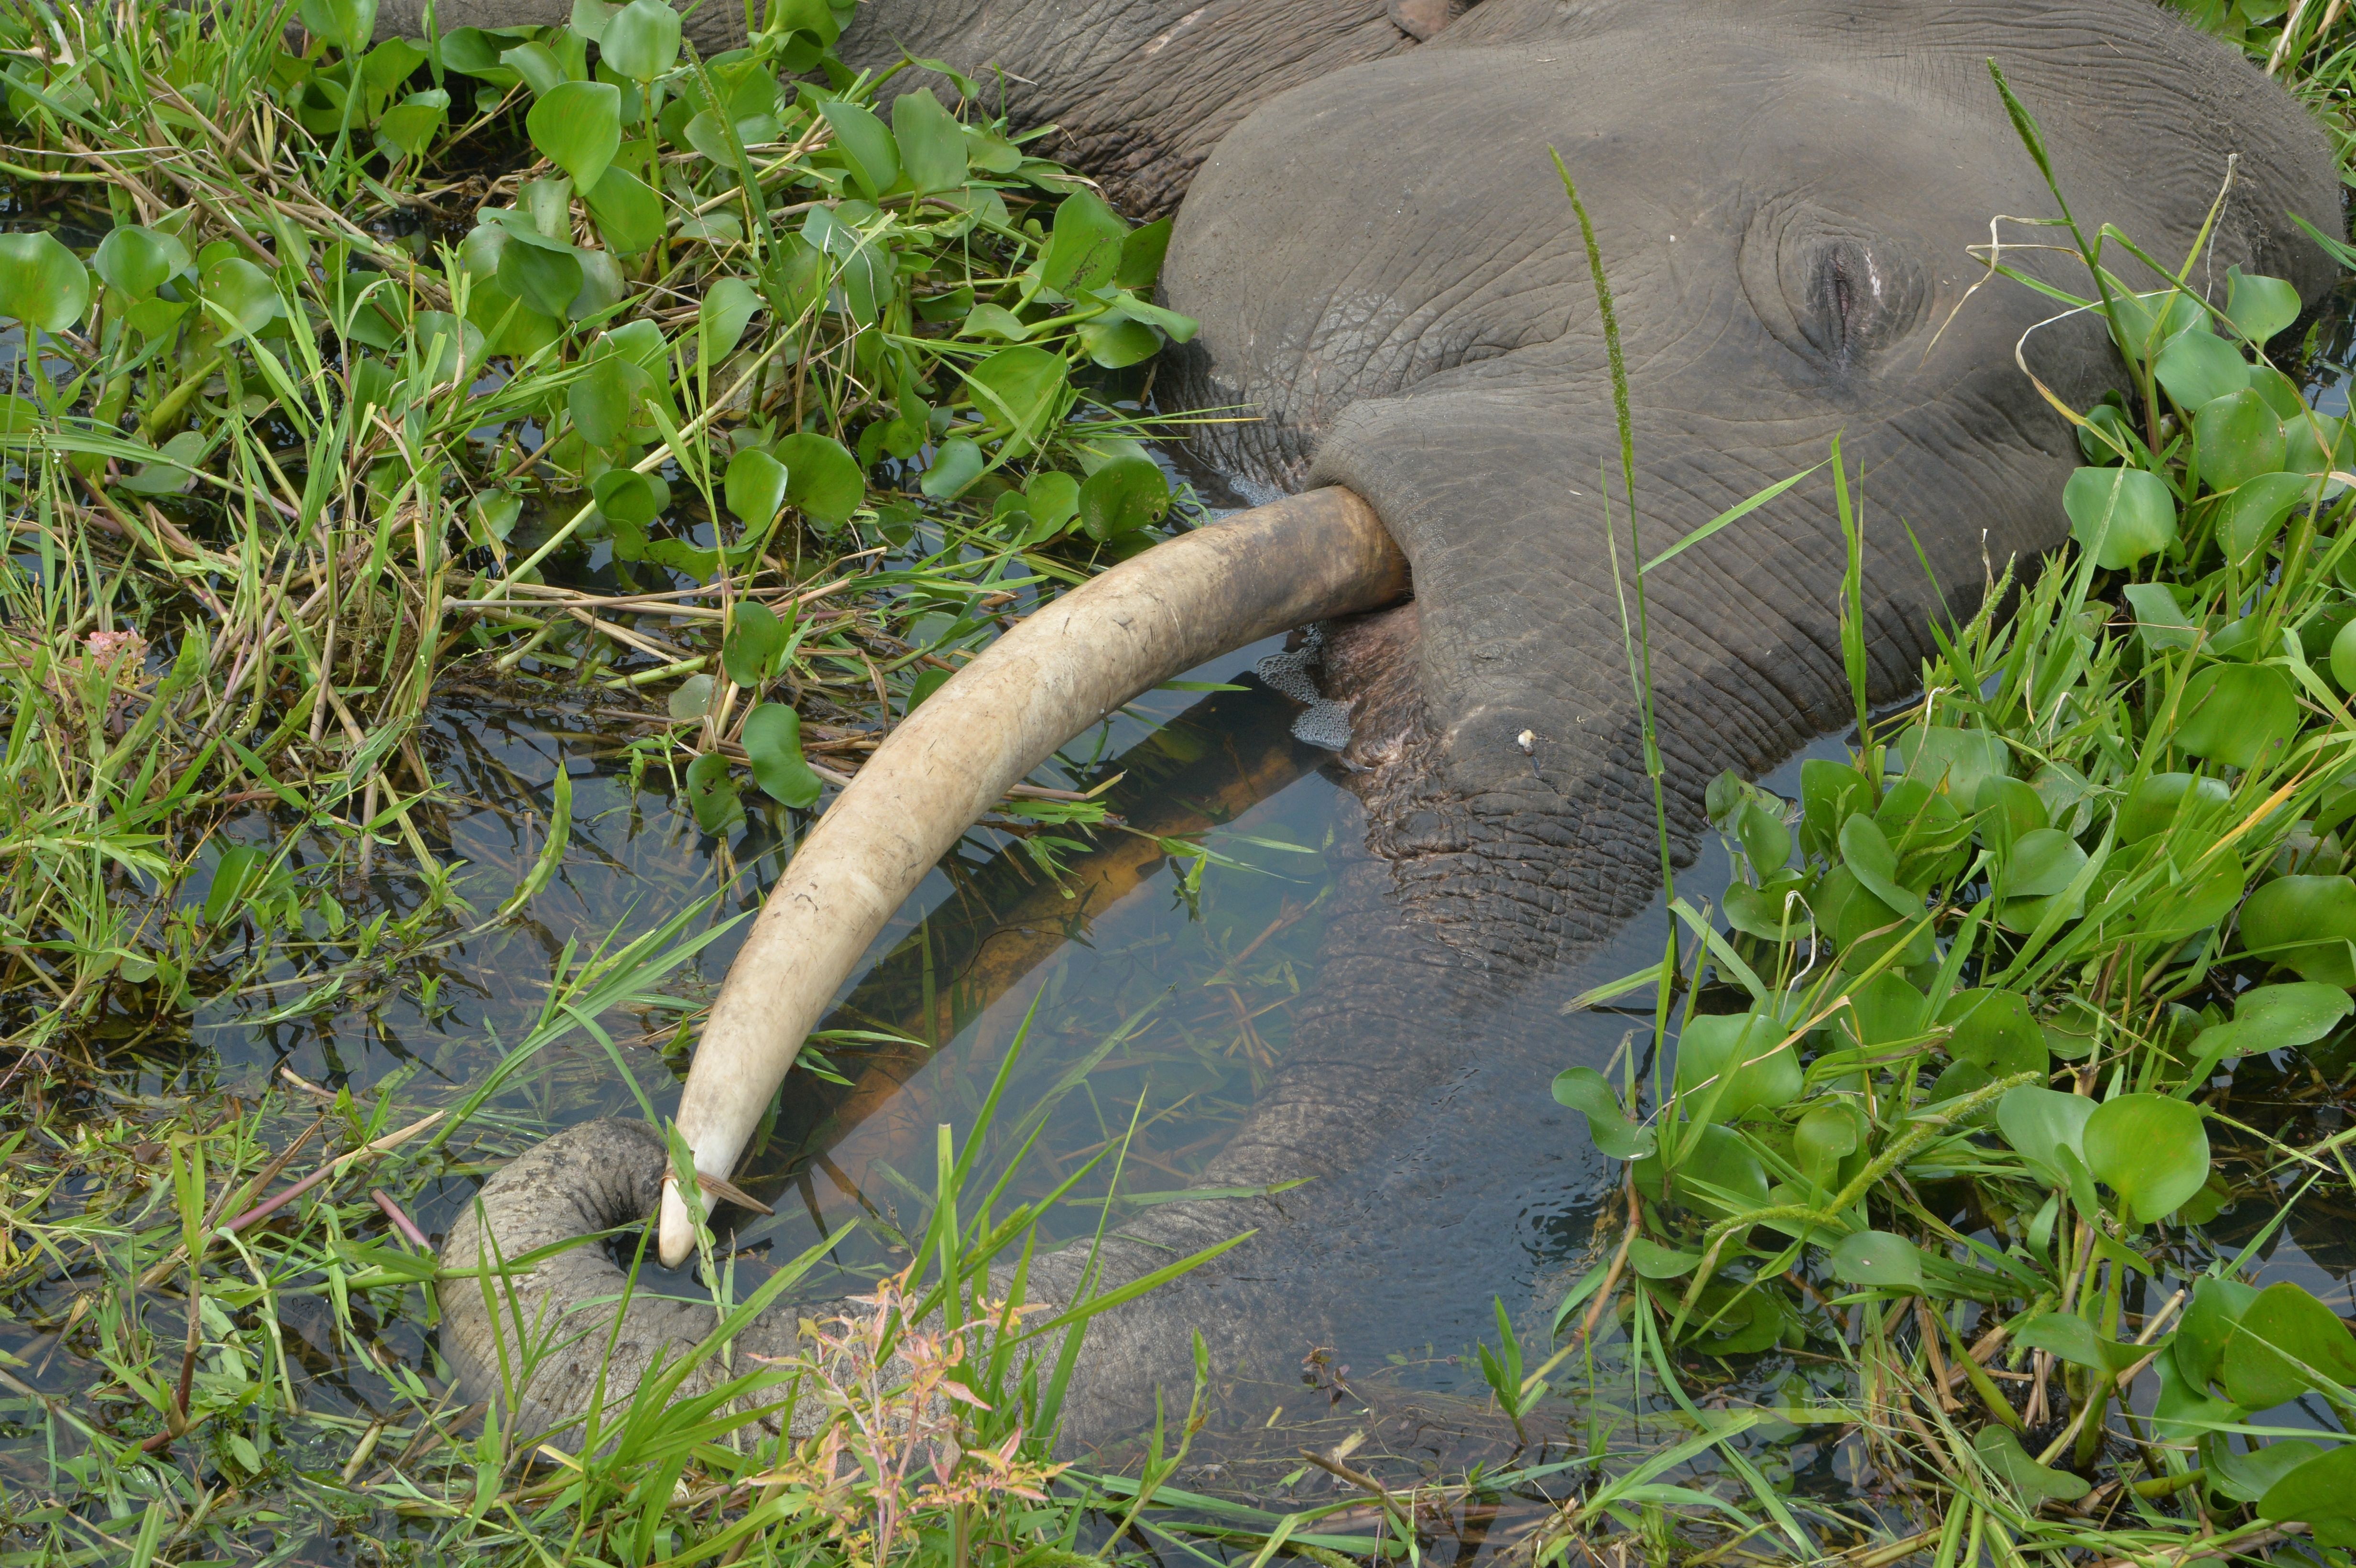 <p>File photo: An elephant found dead in a field in West Bengal, India, on 19 October, 2019, with electrocution suspected as cause of death</p>